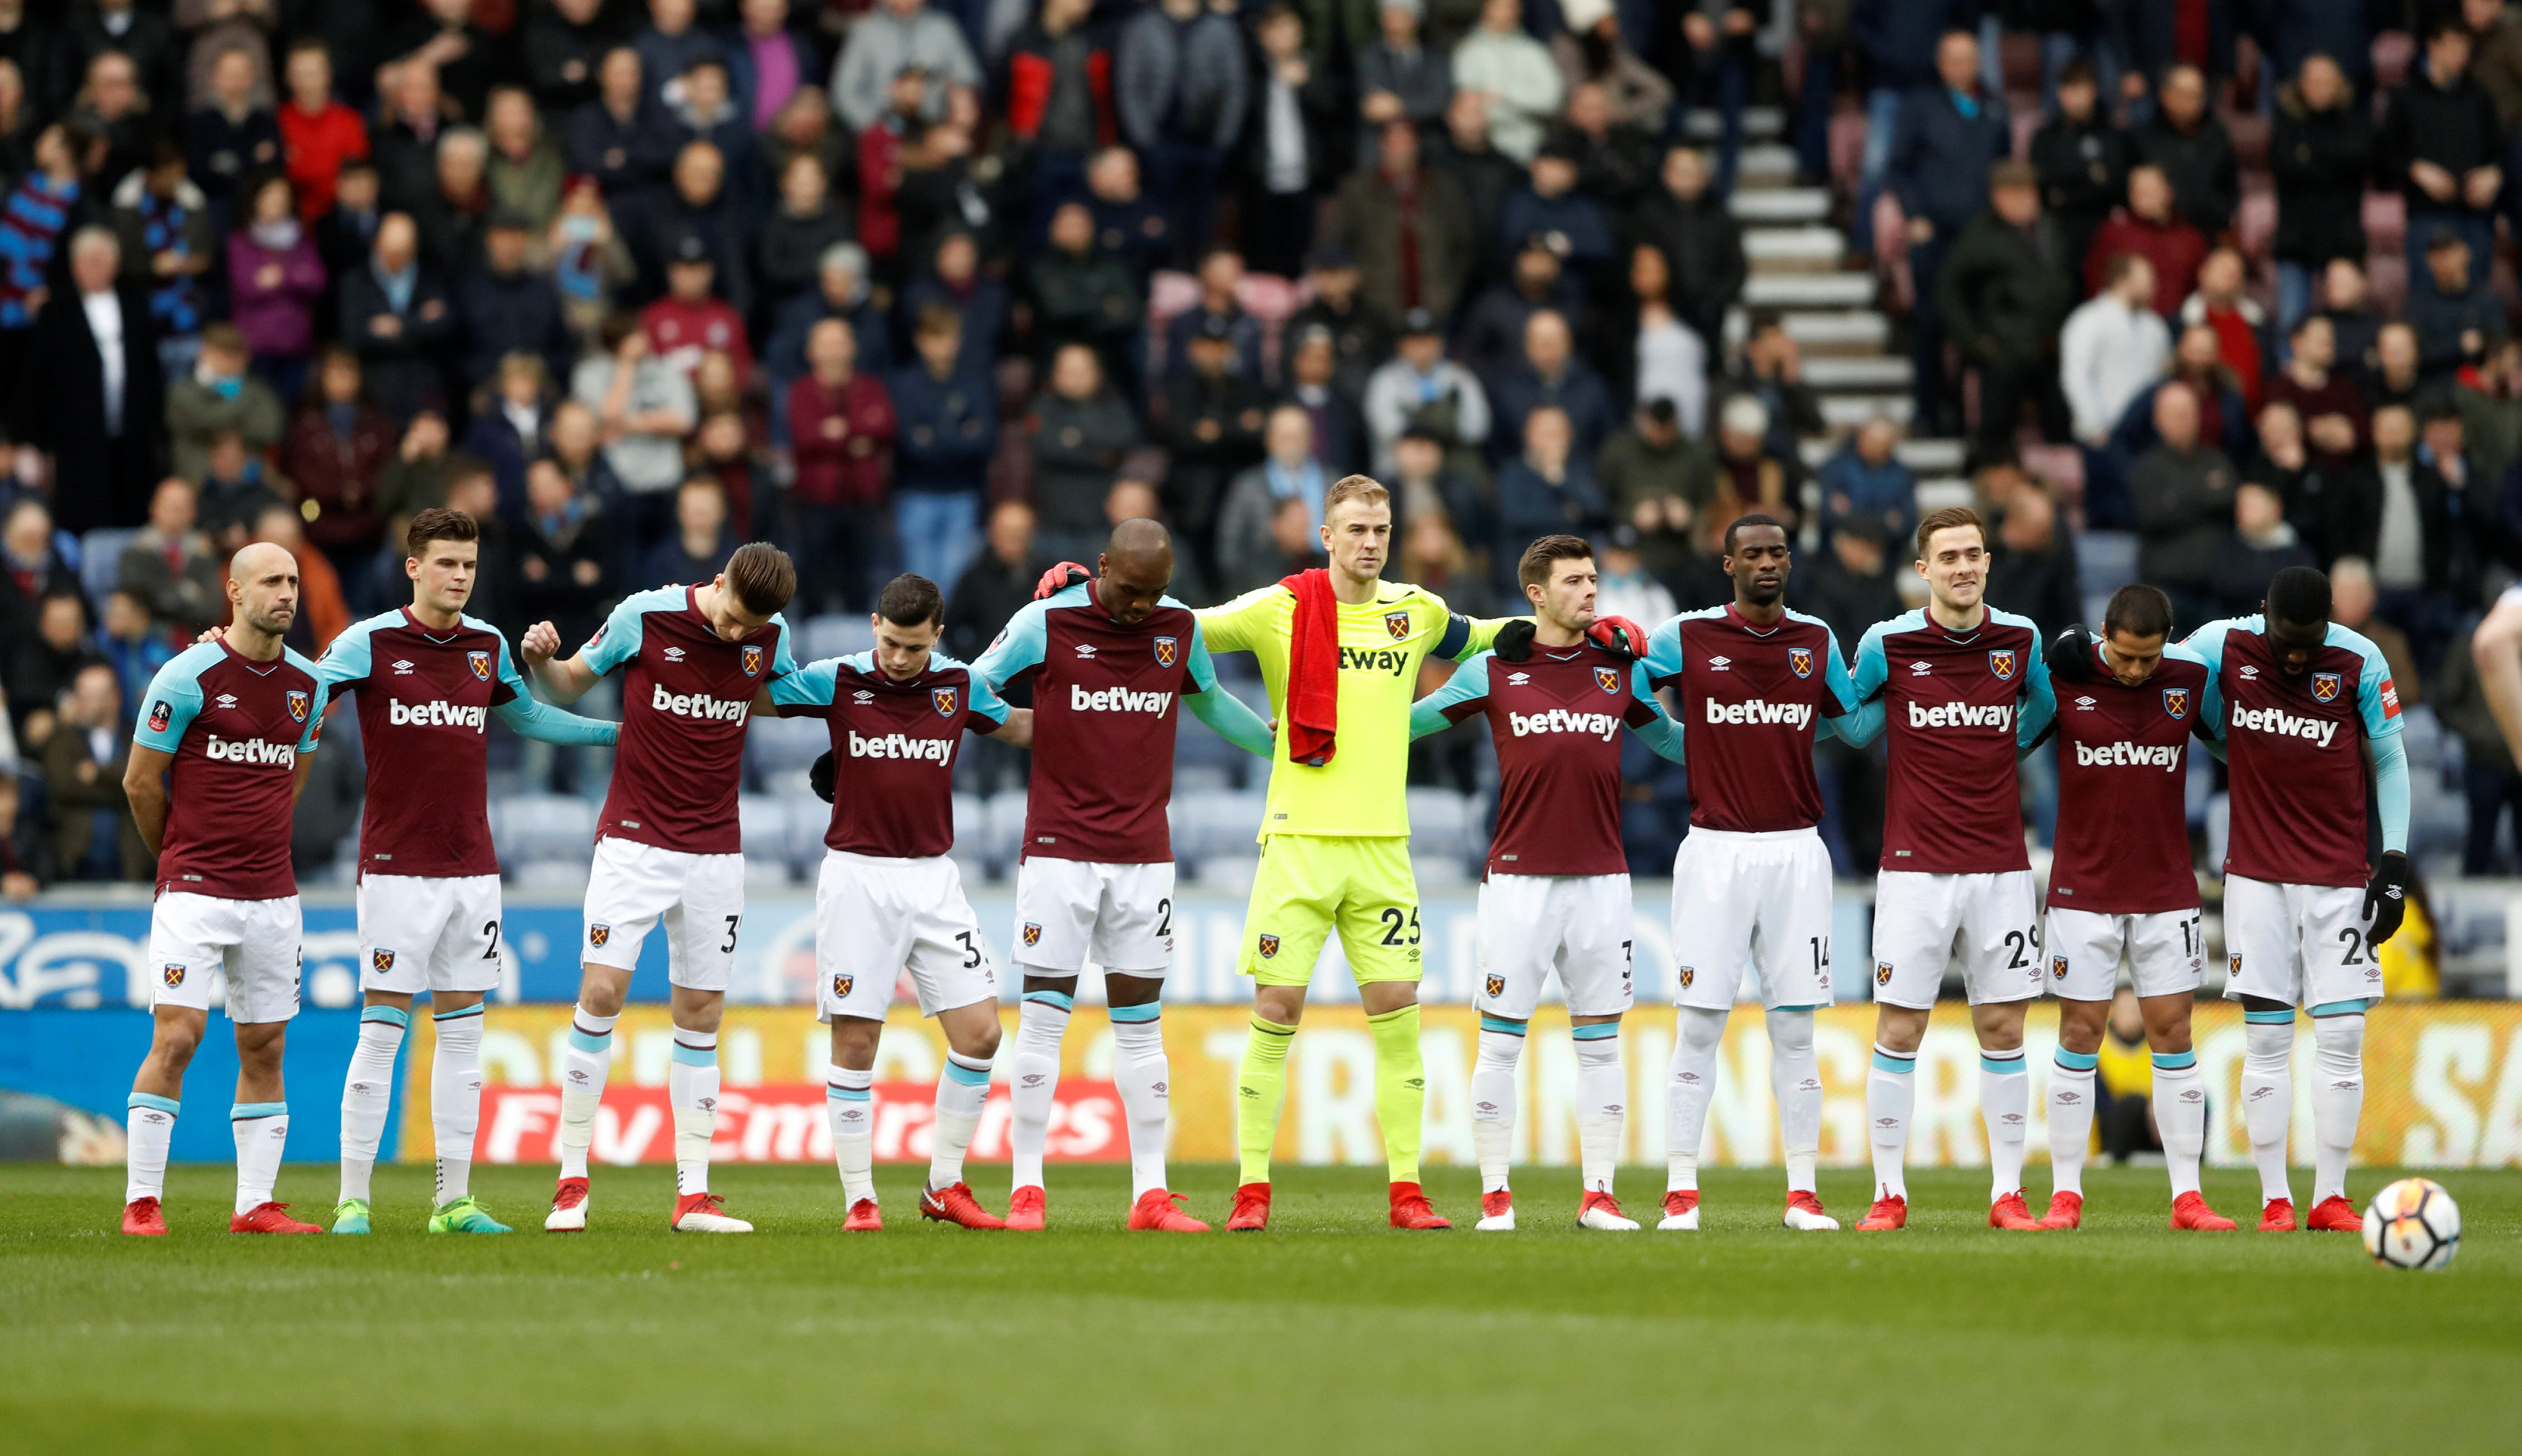 West Ham United Squad 2020: West Ham first team all players 2020